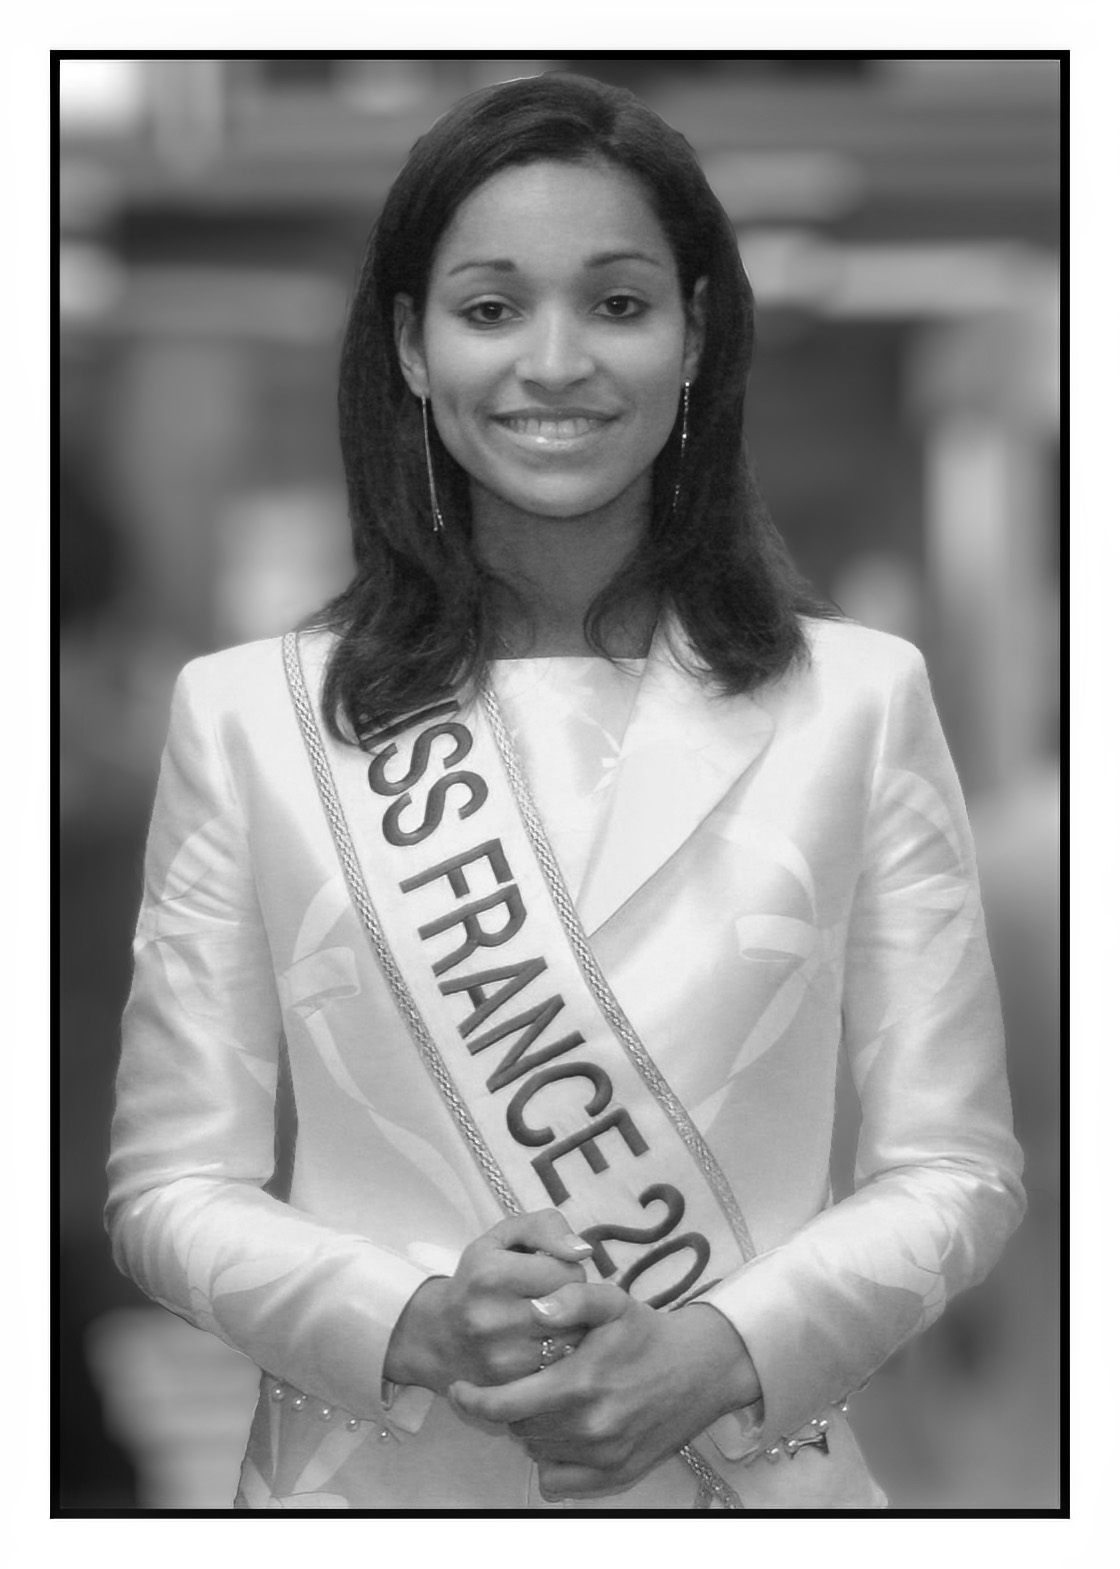 Cindy Fabre : Miss France 2005